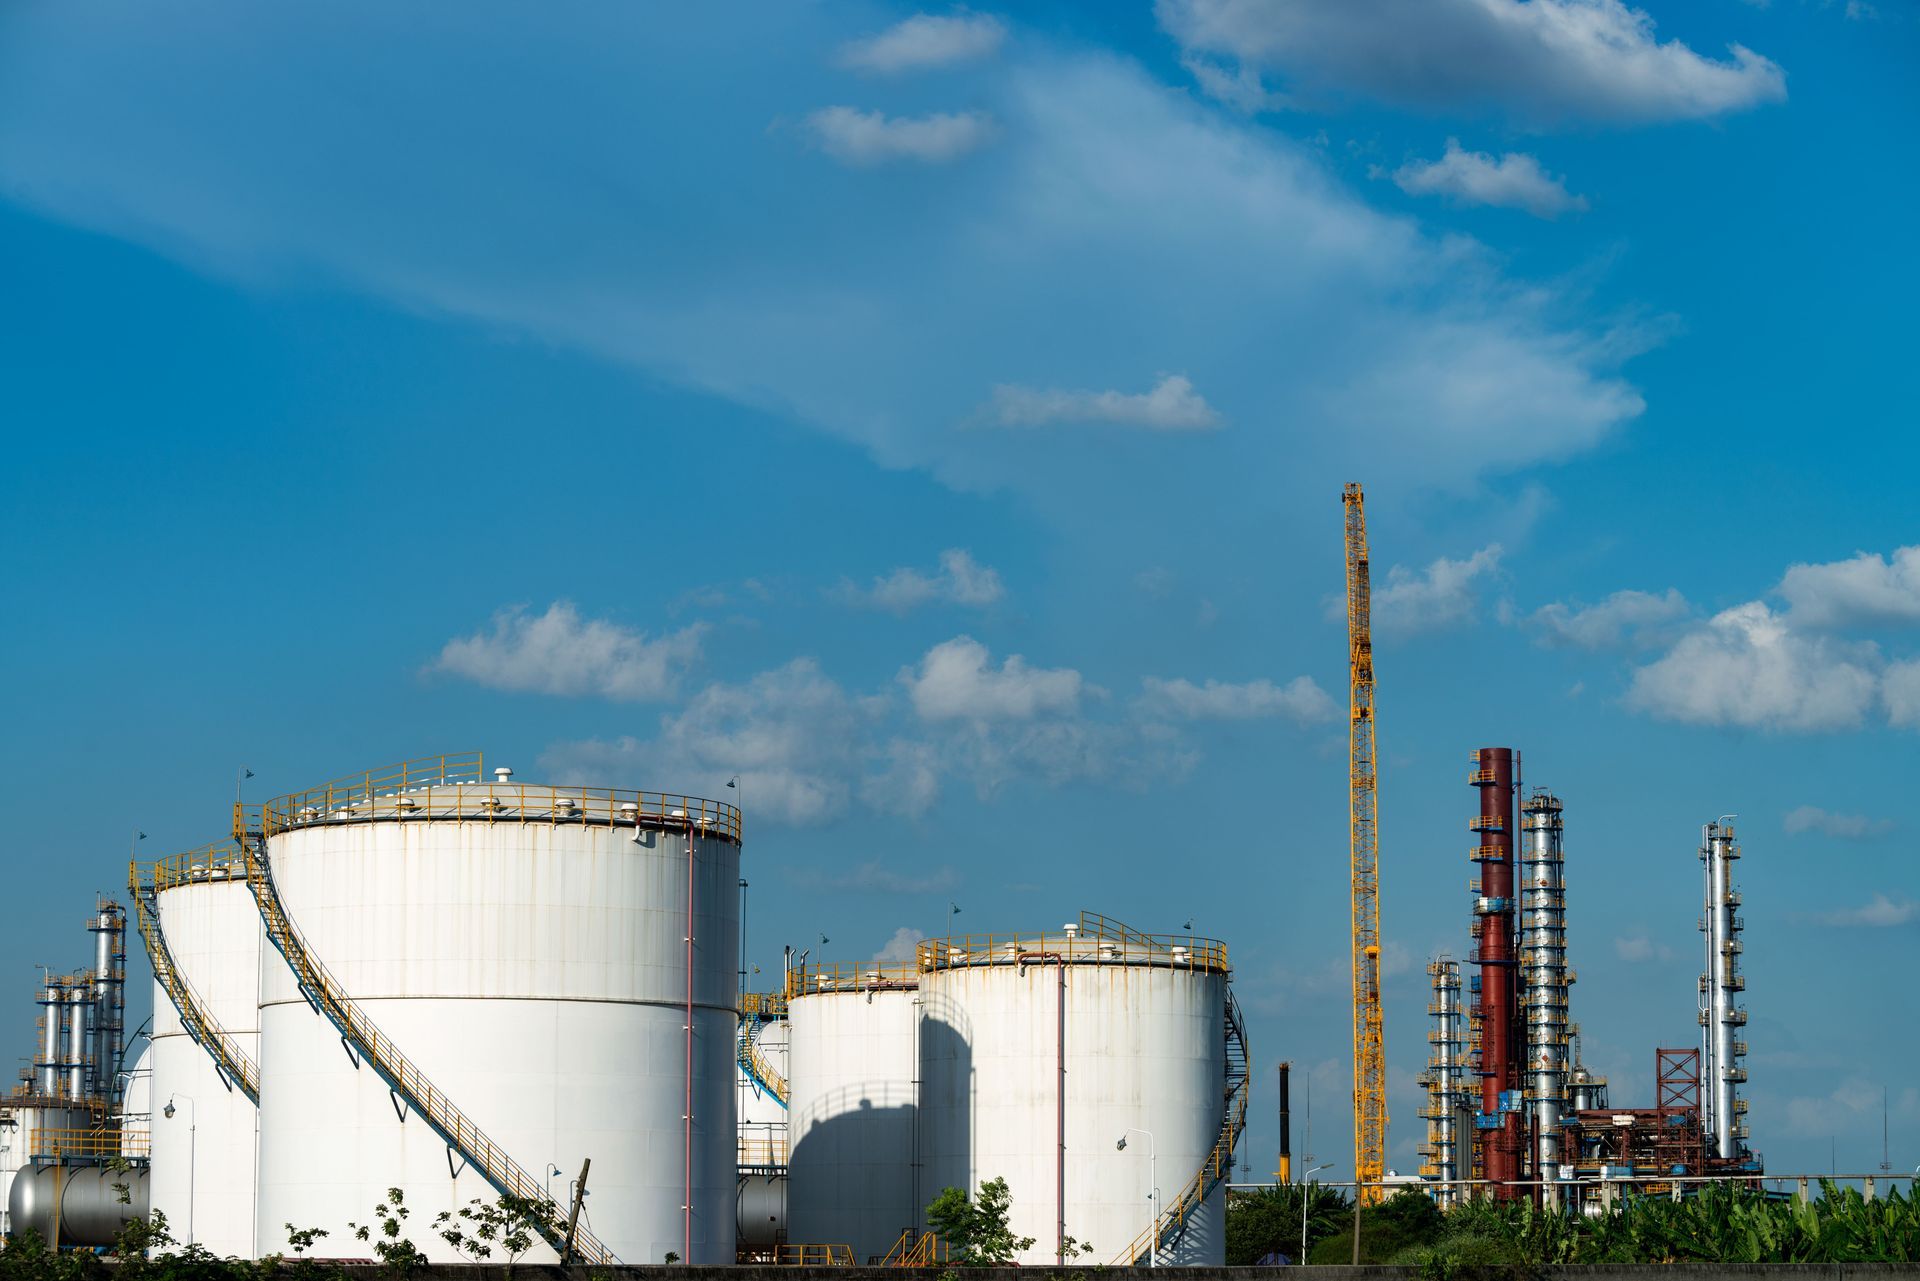 A large oil refinery with a blue sky in the background.